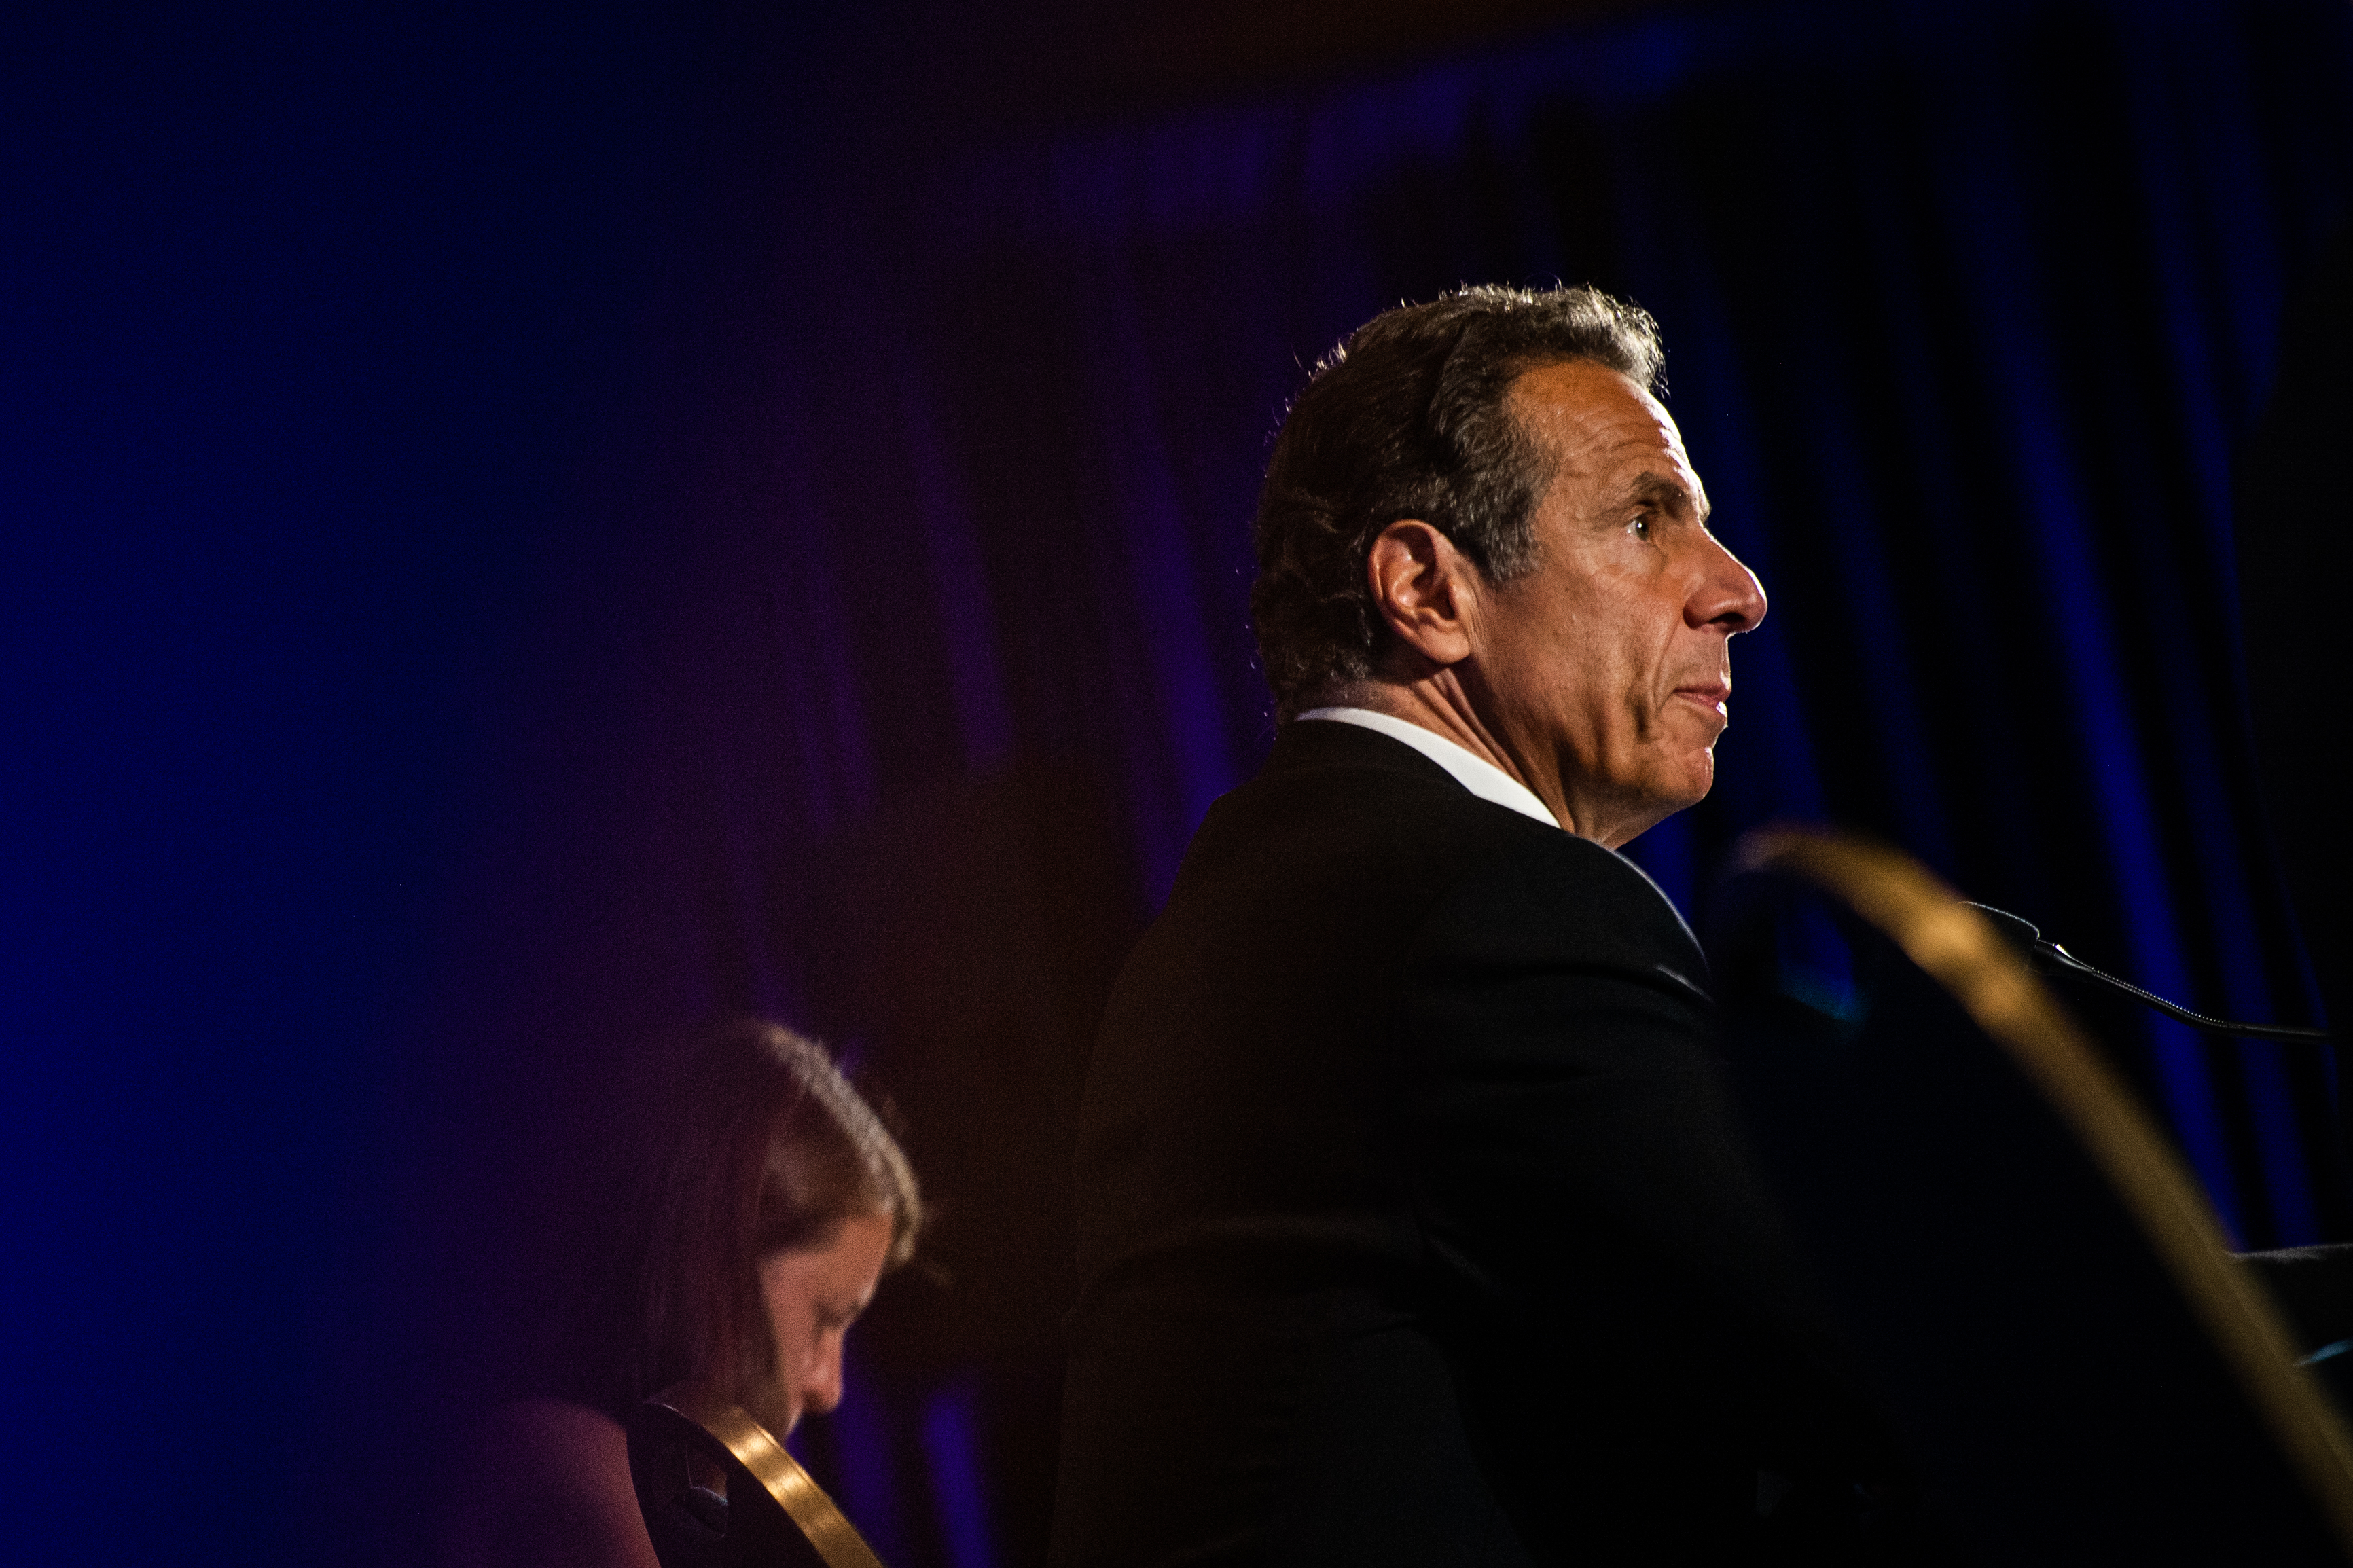 justice dept. says cuomo created ‘sexually hostile work environment’ as governor